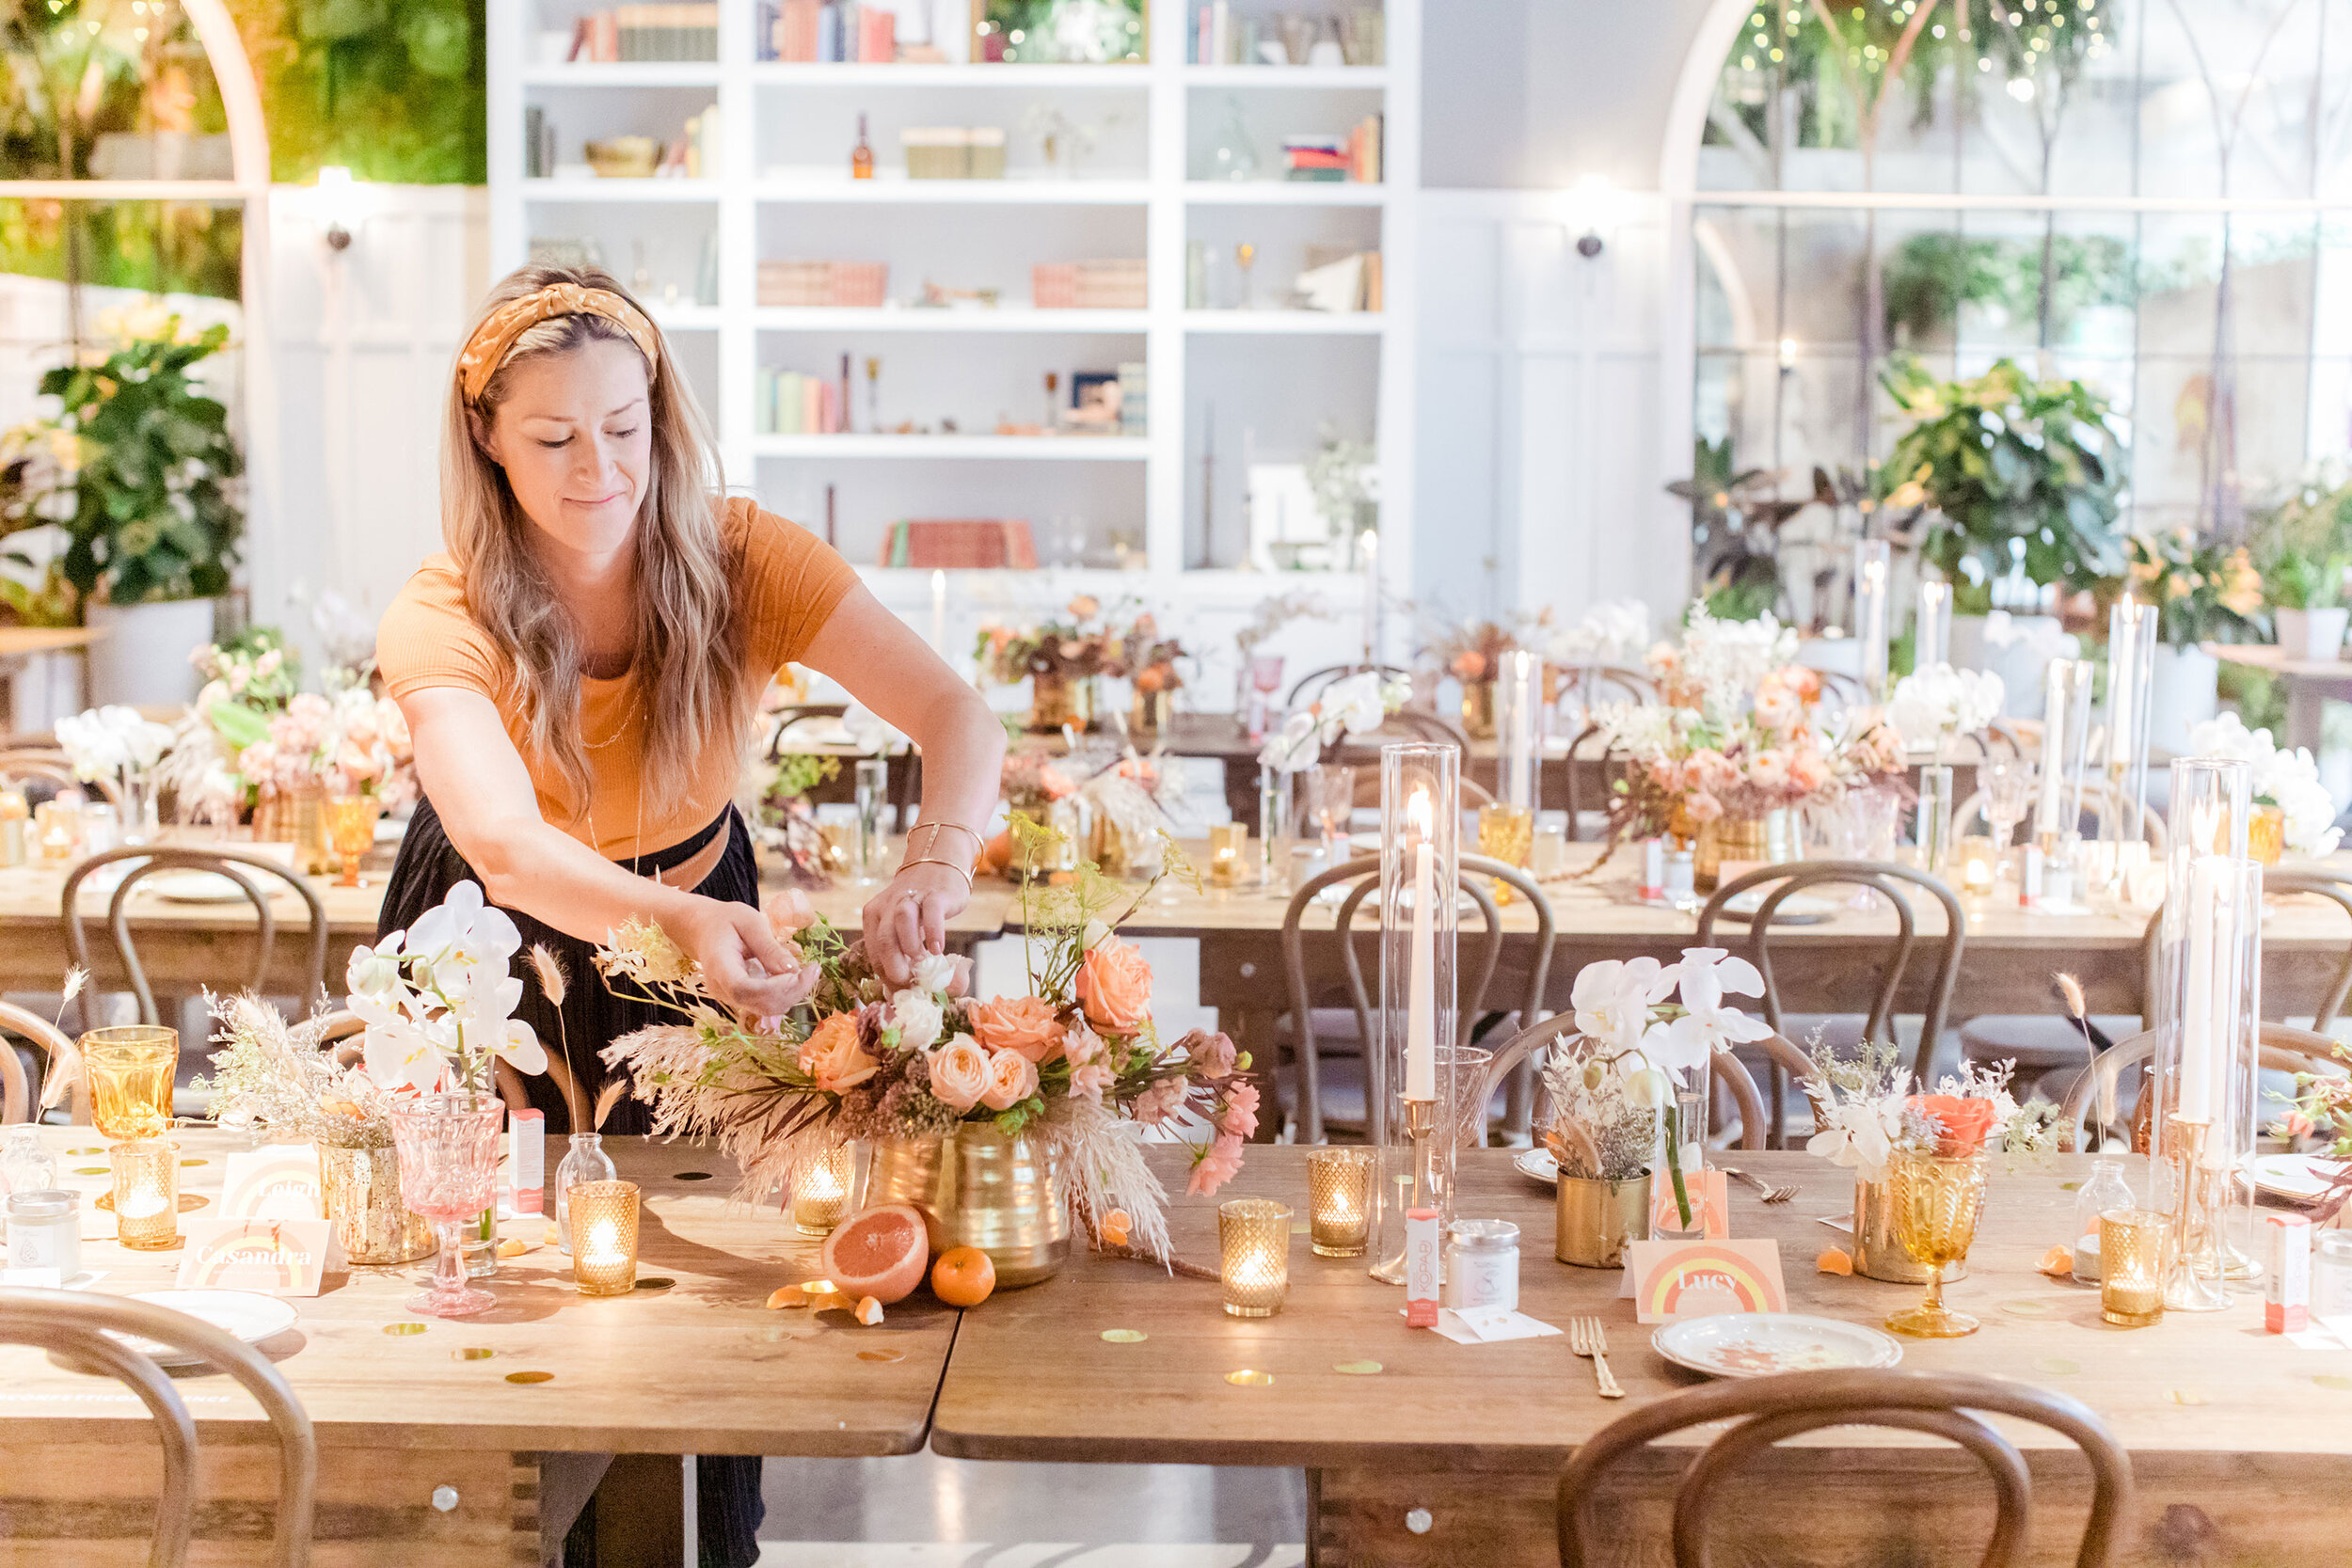 Posies-Floral-Co-Southern-California-Workshop-And-Corporate-Event-Florist.jpg